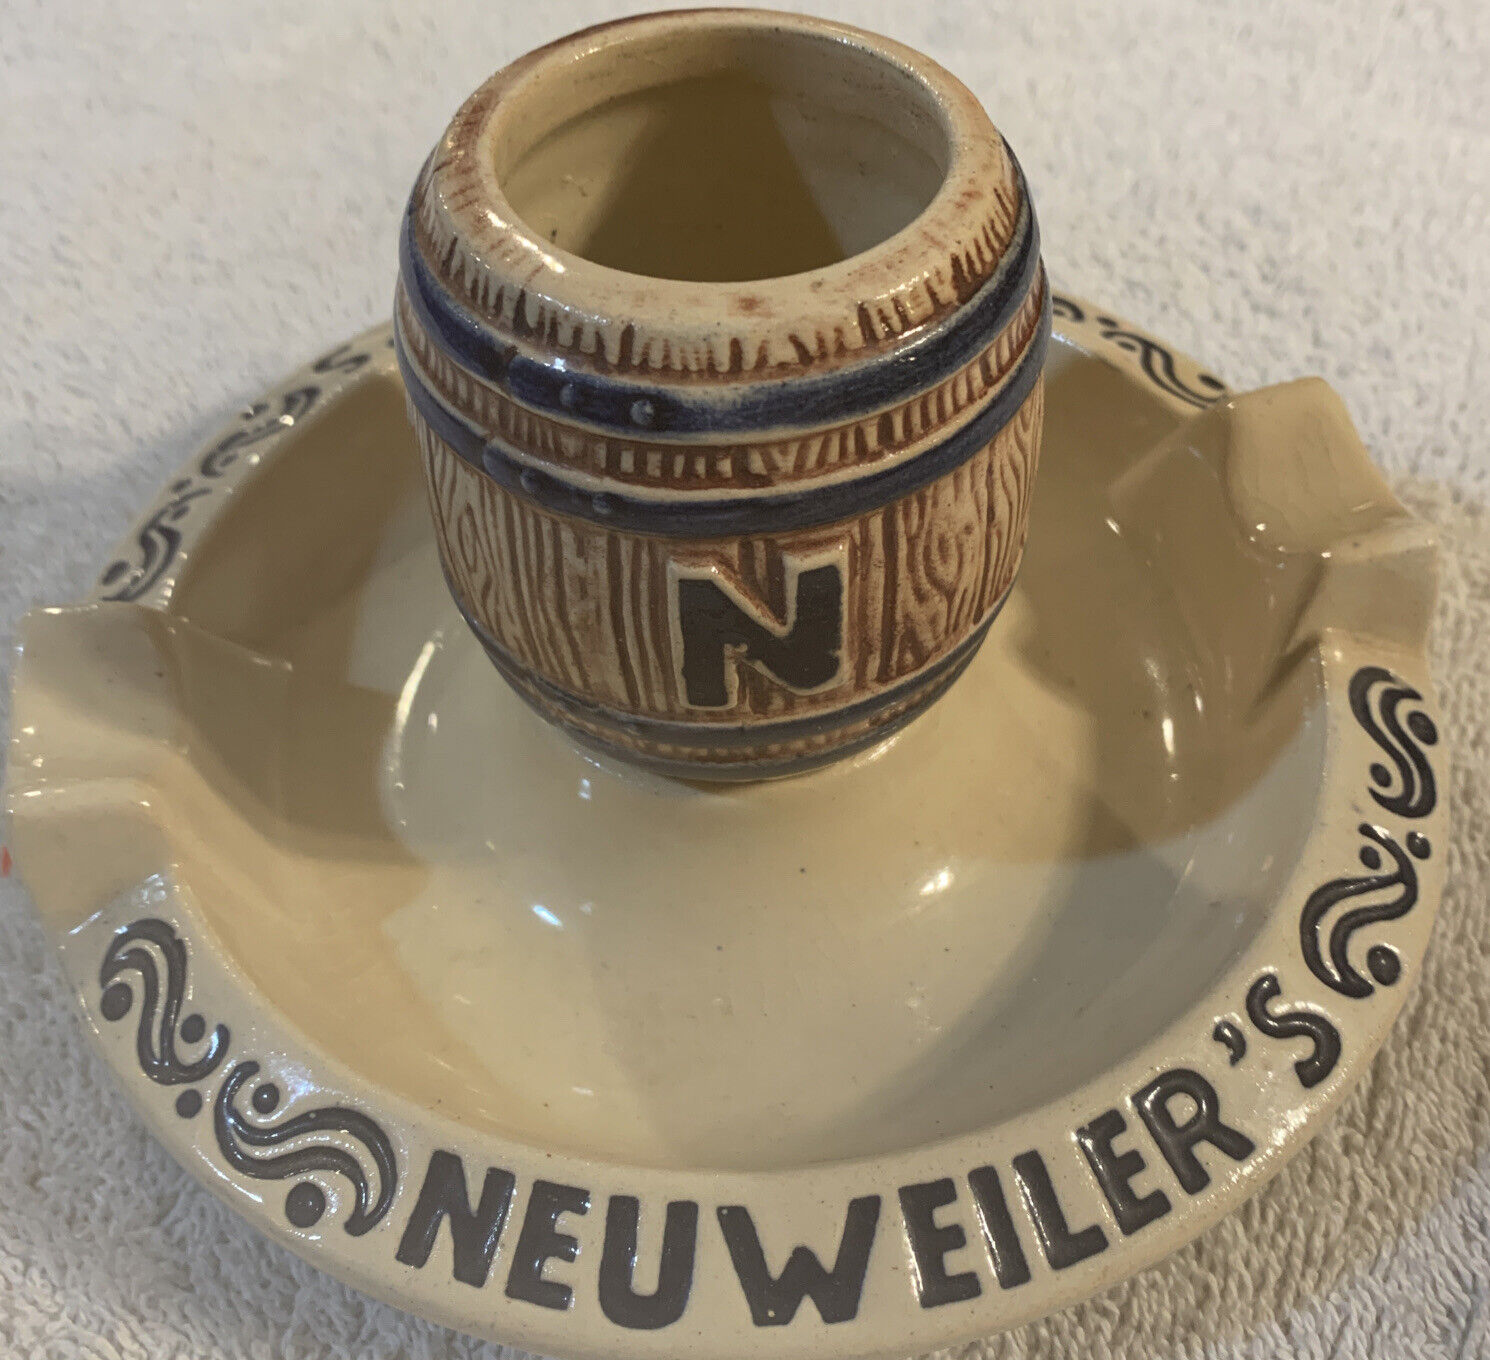 Vintage NEUWEILER Ashtray Keg in Middle Ceramic Made in Germany Western